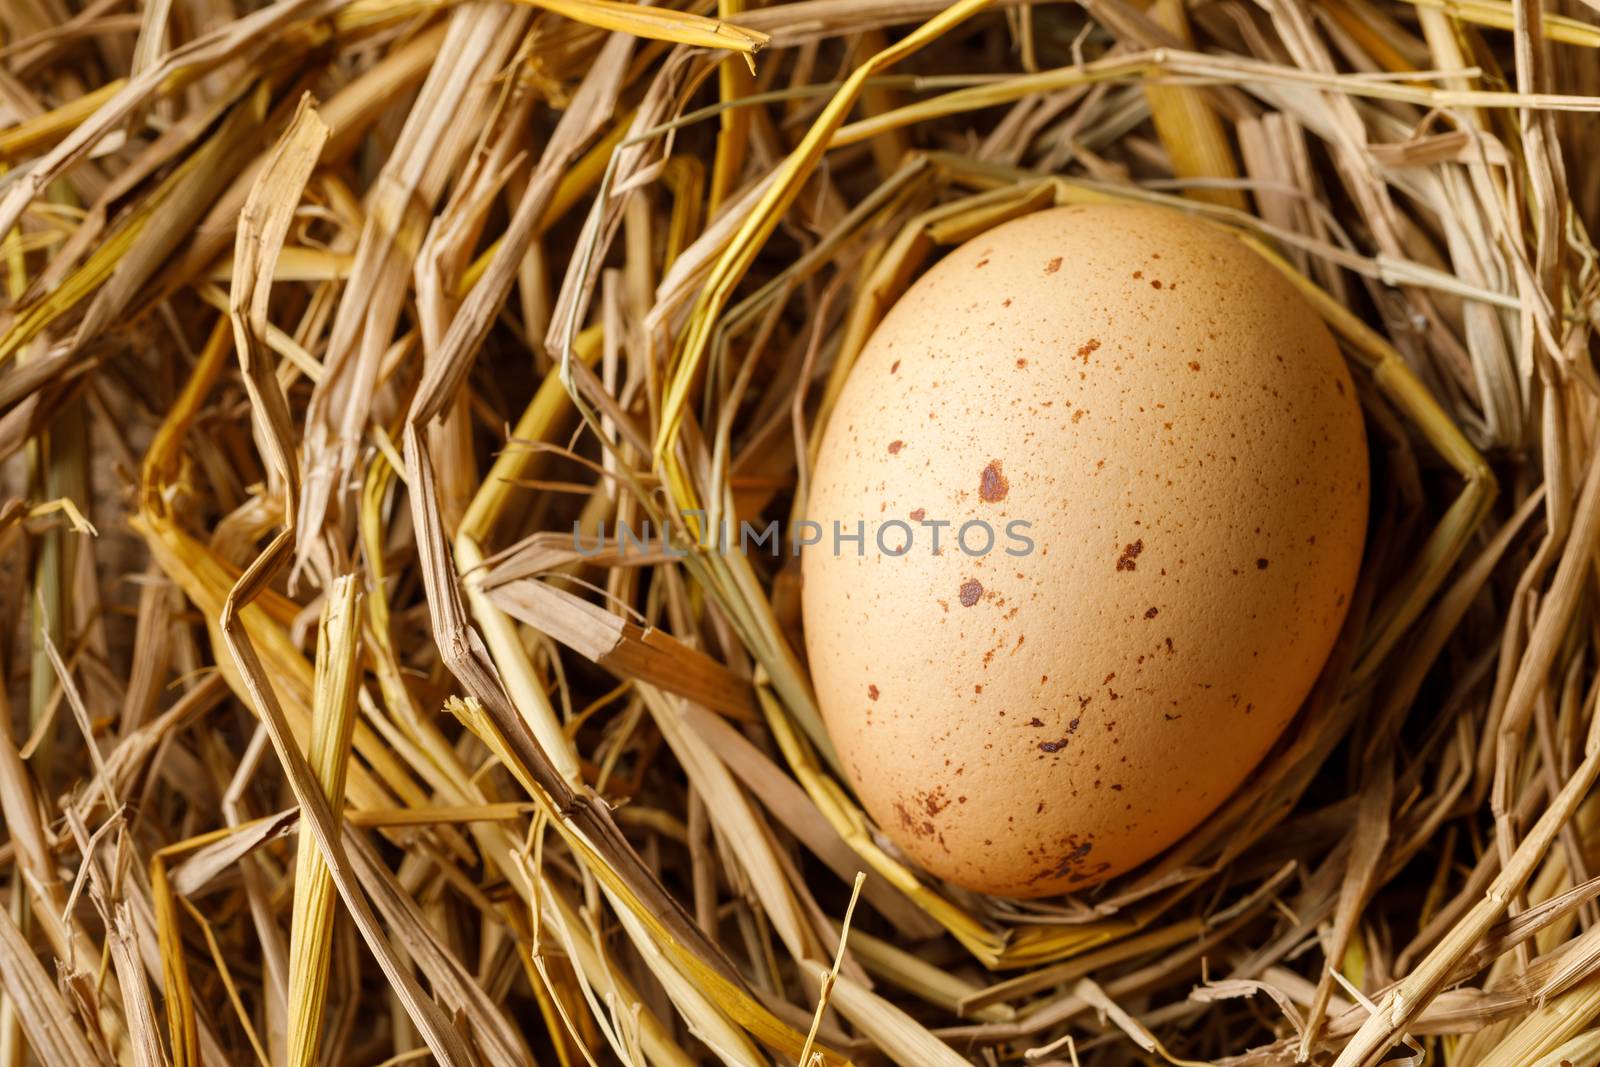 Chicken or hen egg on straw nest, organic food fresh from poultry farm